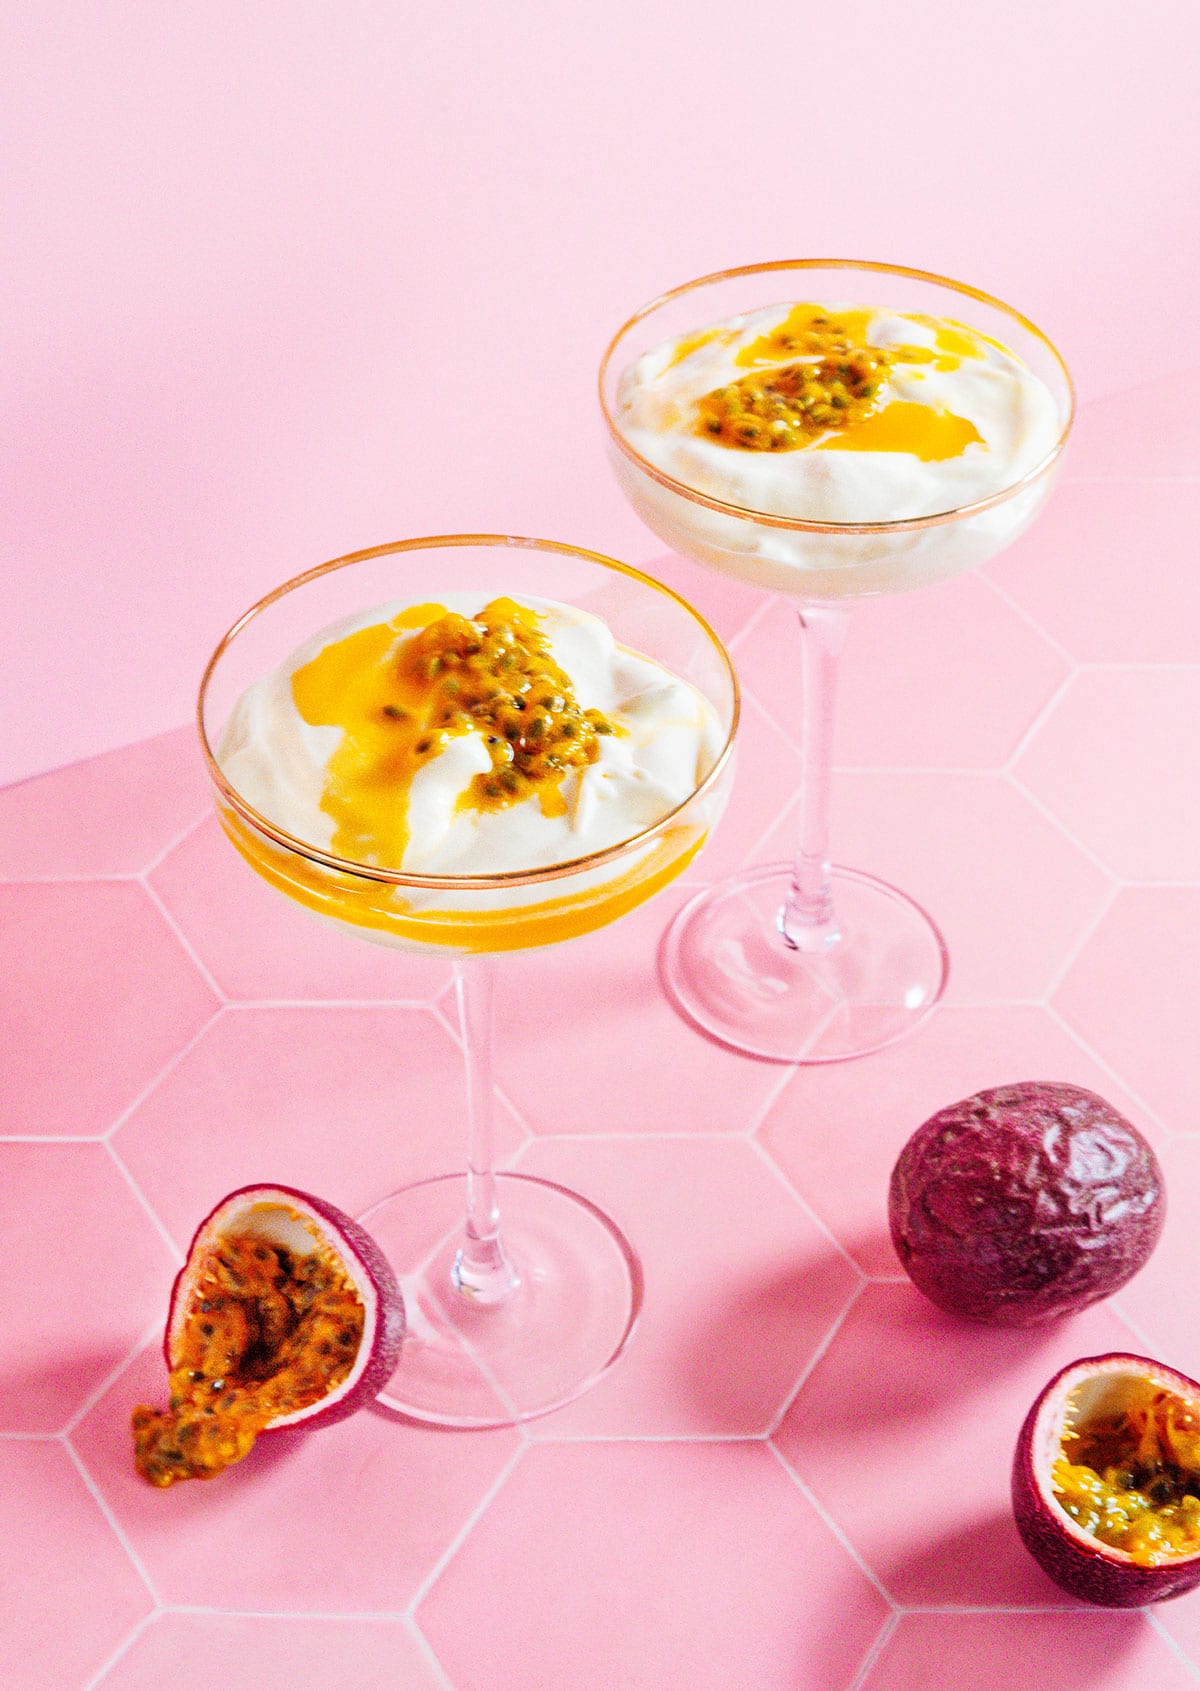 Two martini glasses of passion fruit mousse with whole passion fruit on the counter.